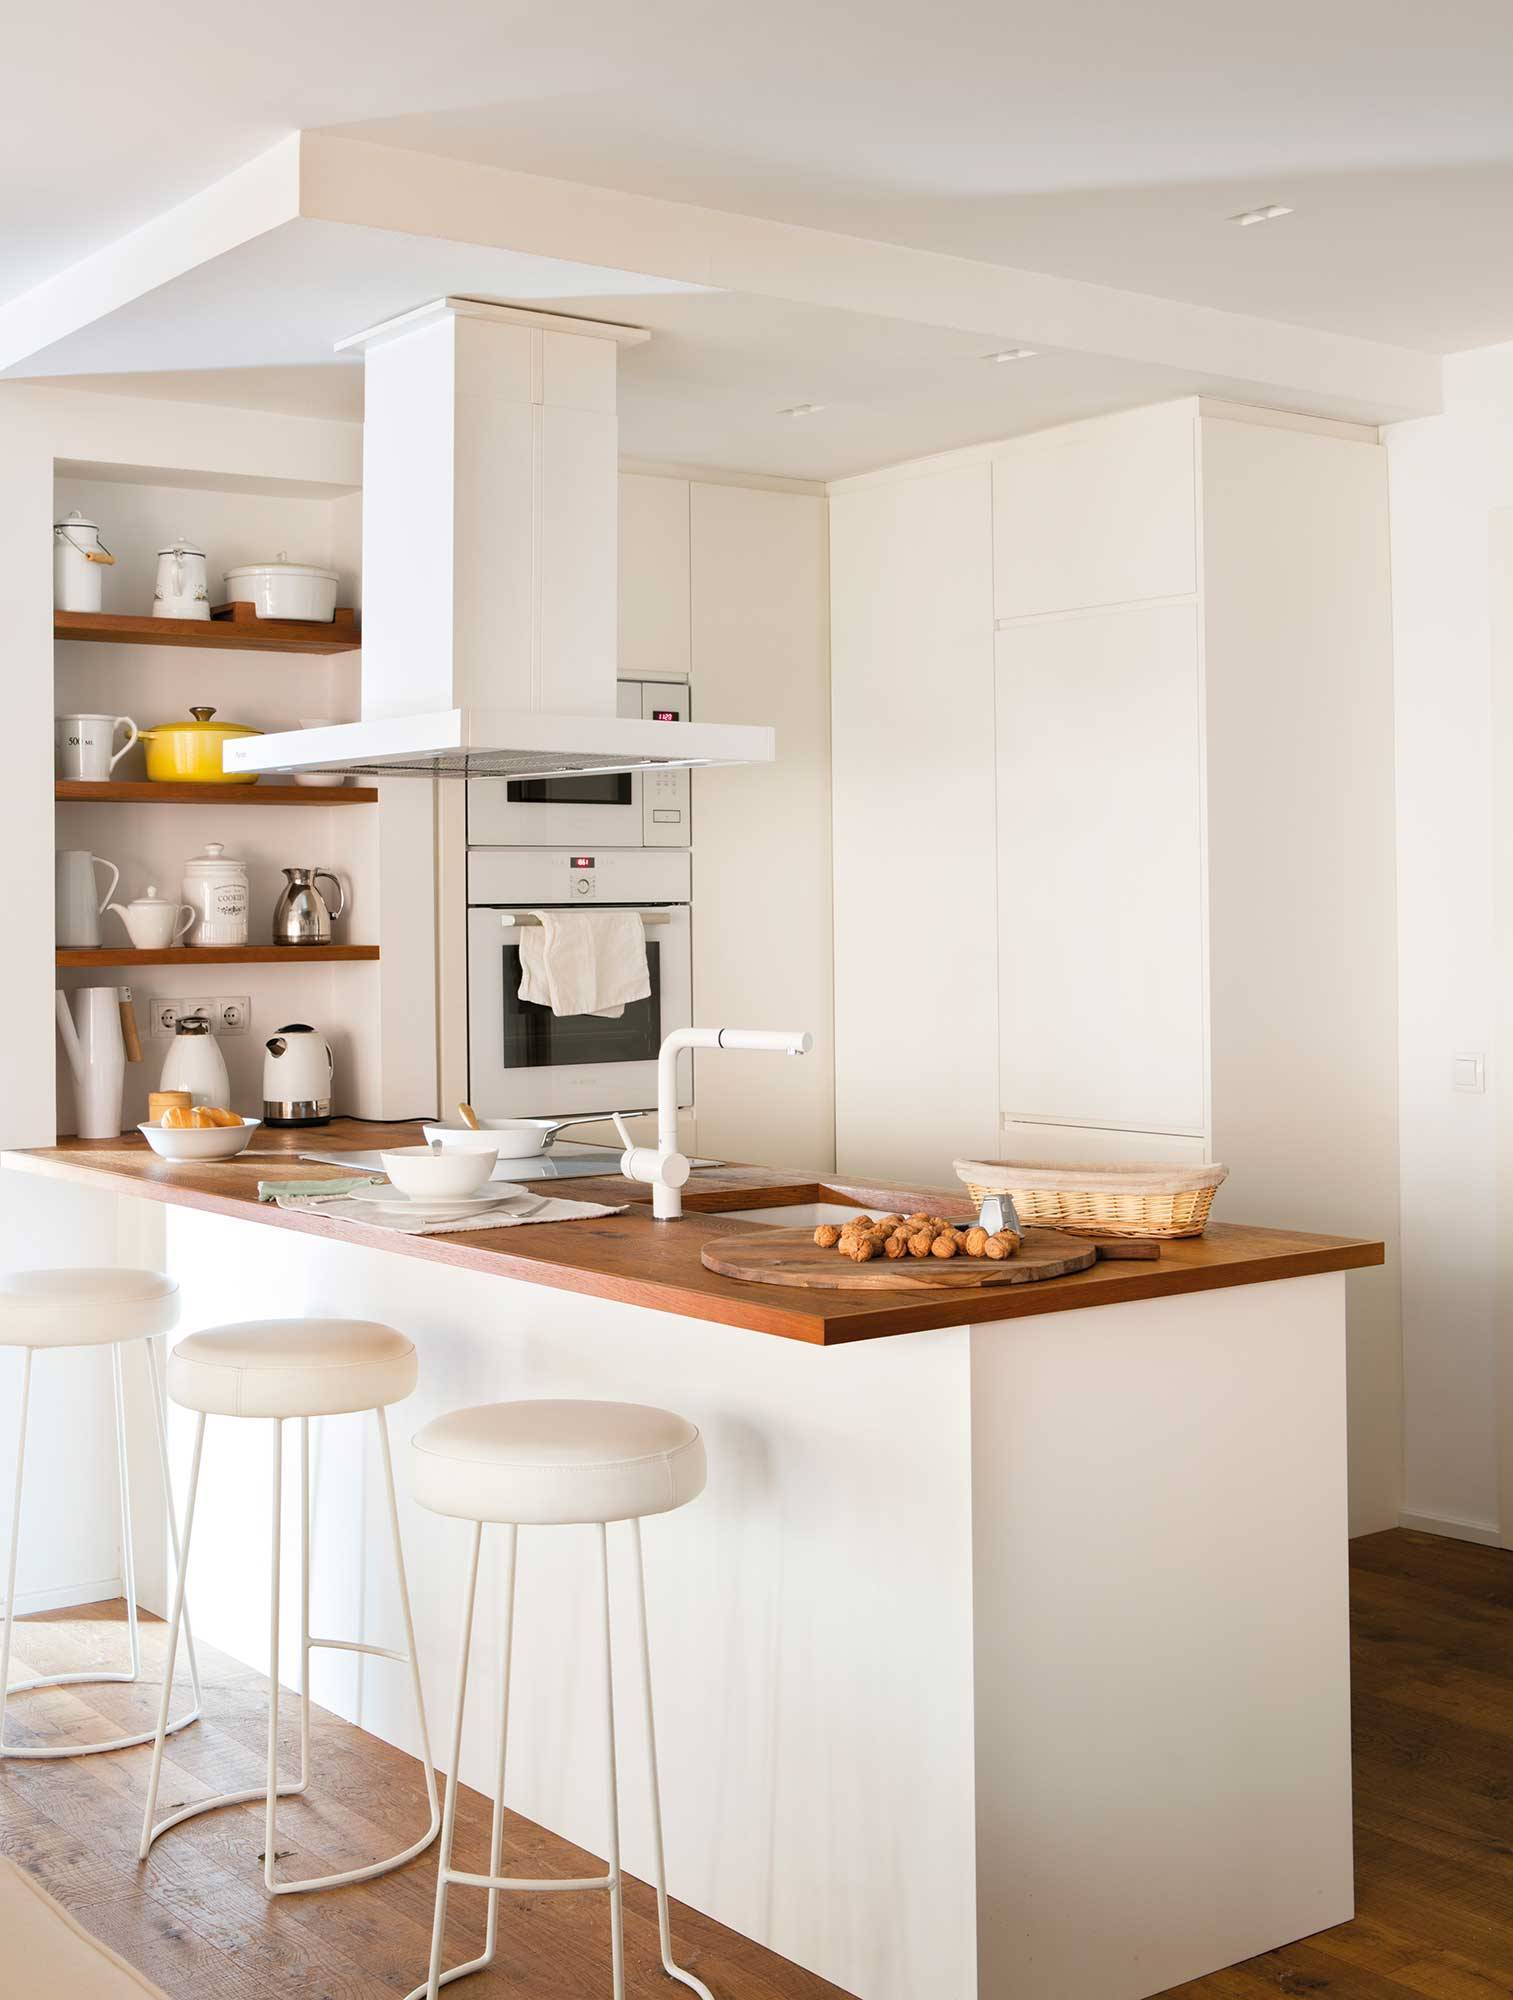 Small, open white kitchen with wooden worktop. 